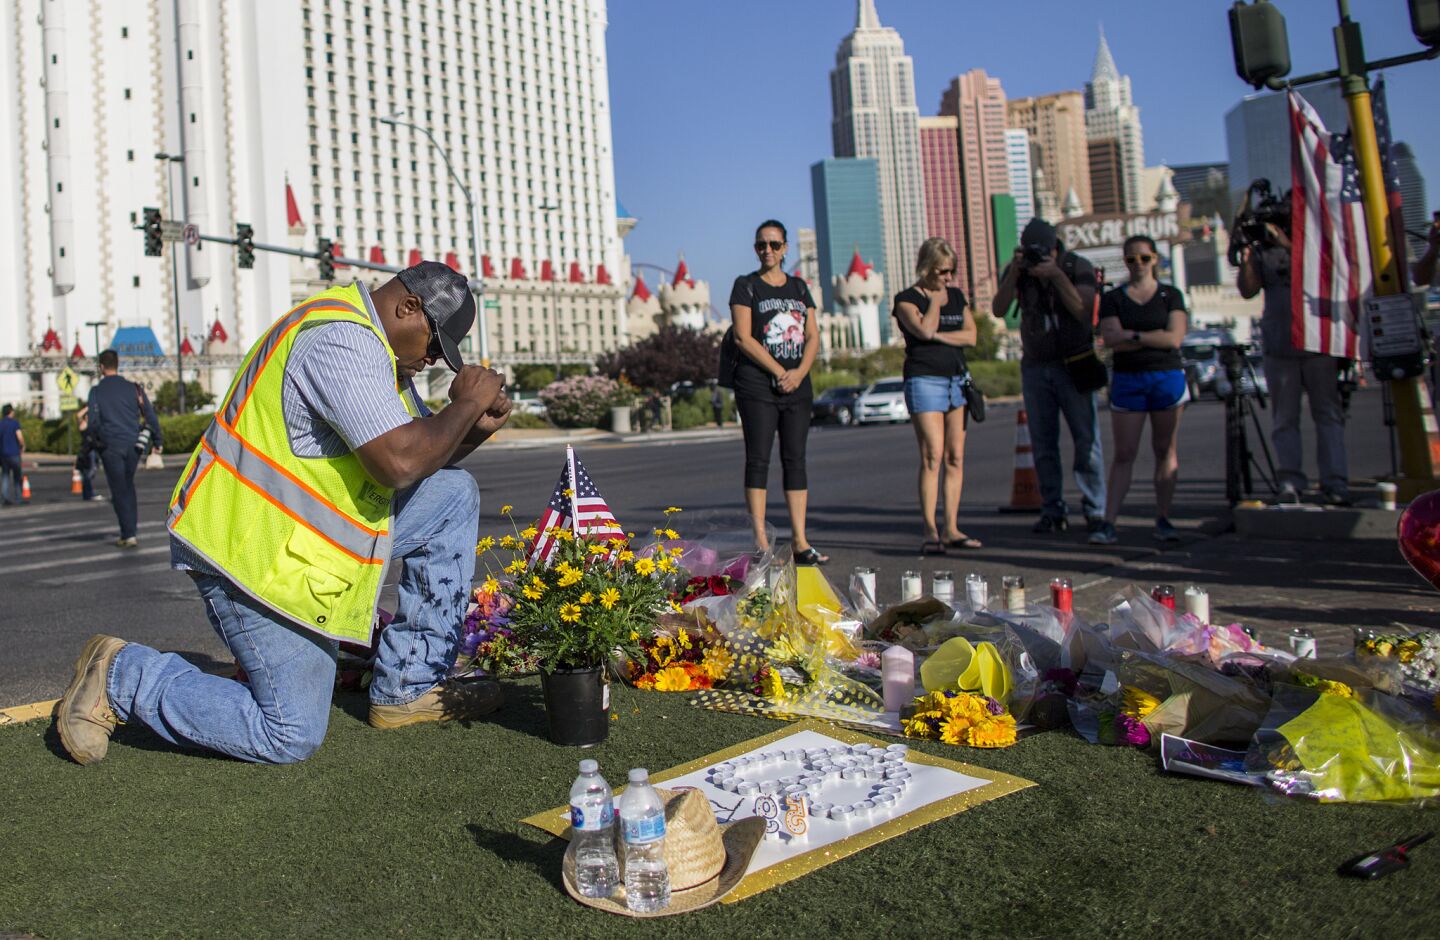 Contractor Robert Walker says a prayer after placing flowers and American flag at the scene of a memorial for the victims of the mass shooting on Las Vegas Boulevard near the crime scene.